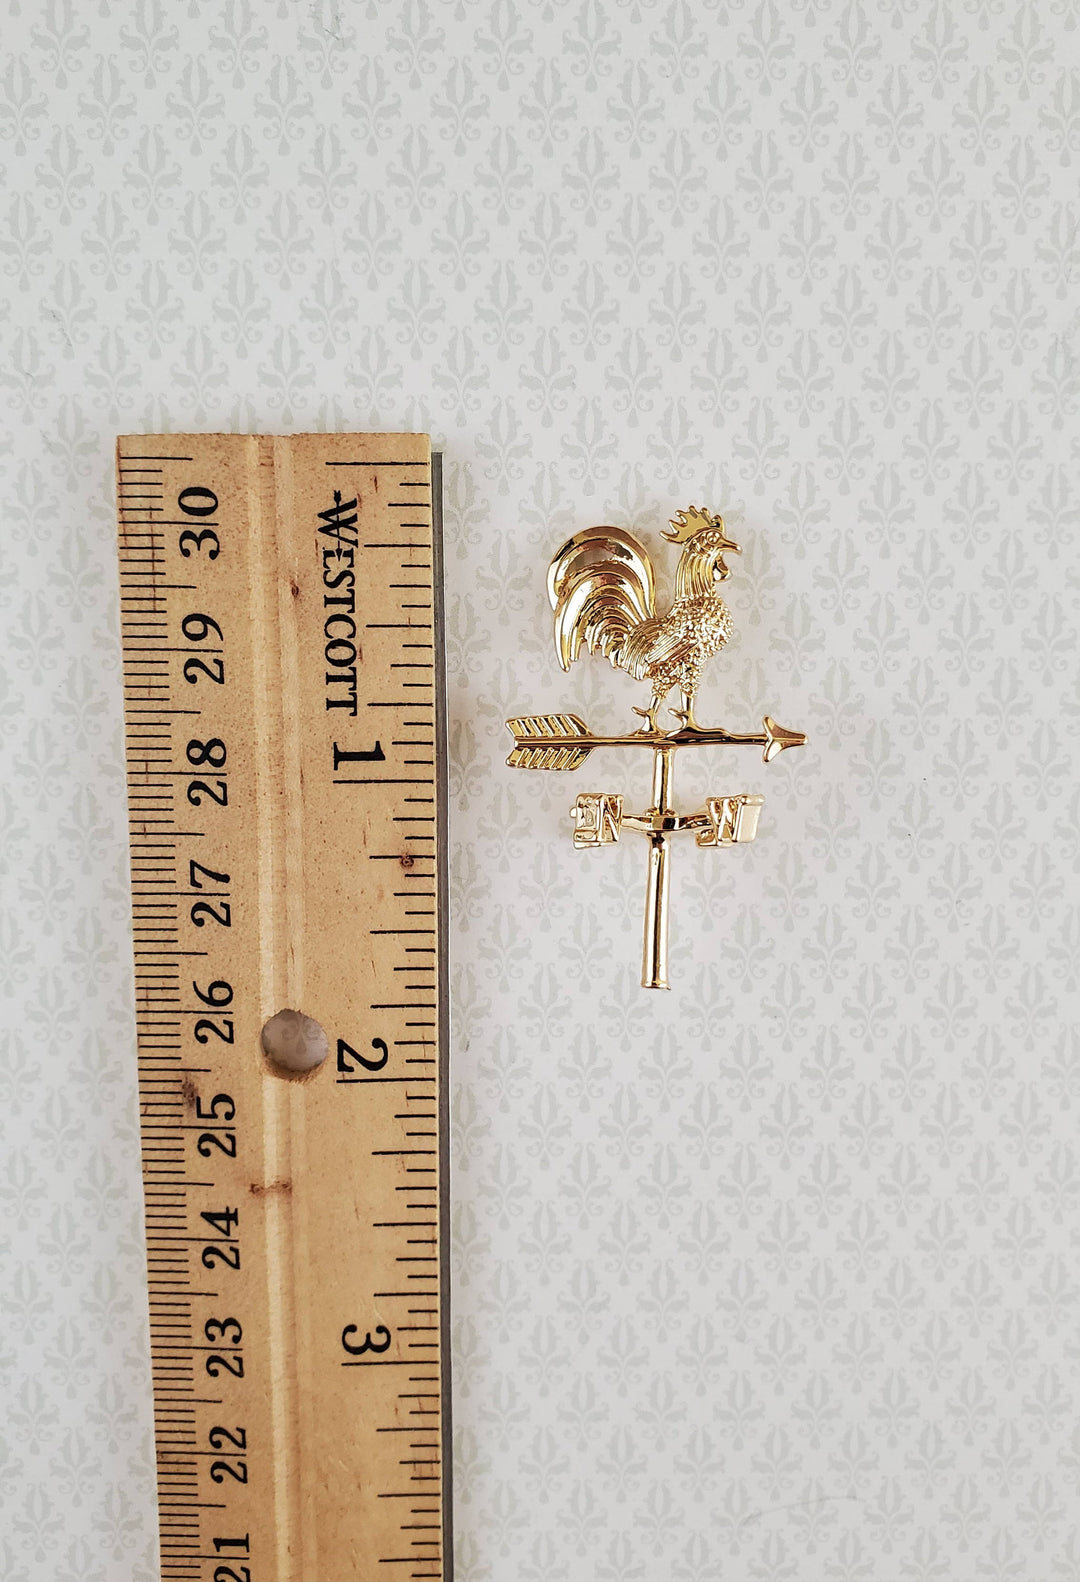 Dollhouse Small Brass Rooster Weathervane use in 1:24 or 1/12 Scale Miniatures